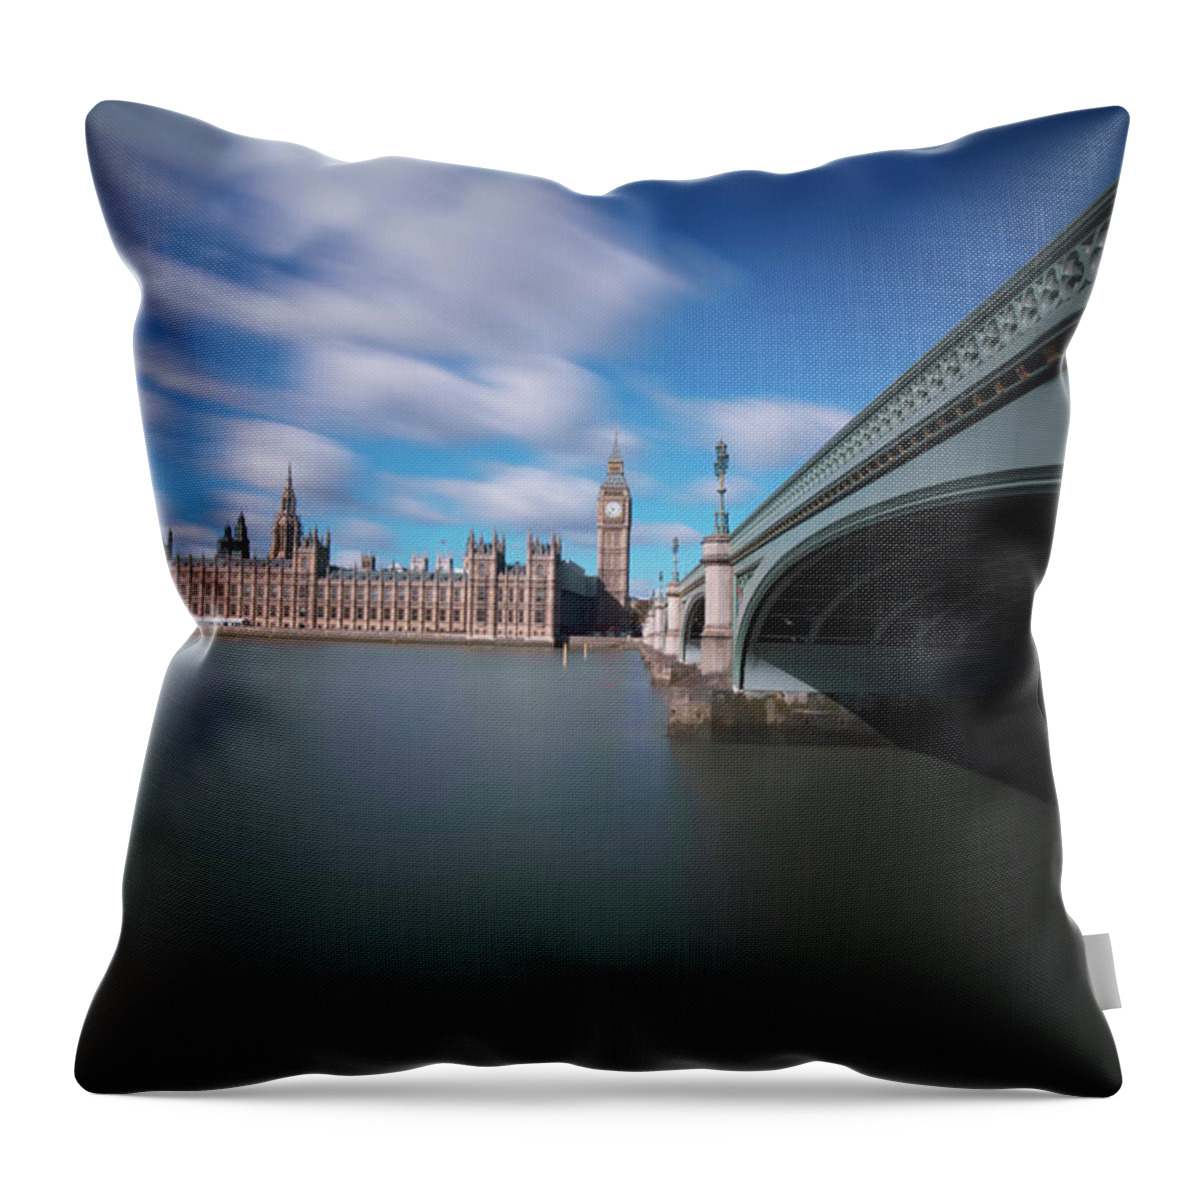 Tranquility Throw Pillow featuring the photograph Houses Of Parliament by Gavin Parsons